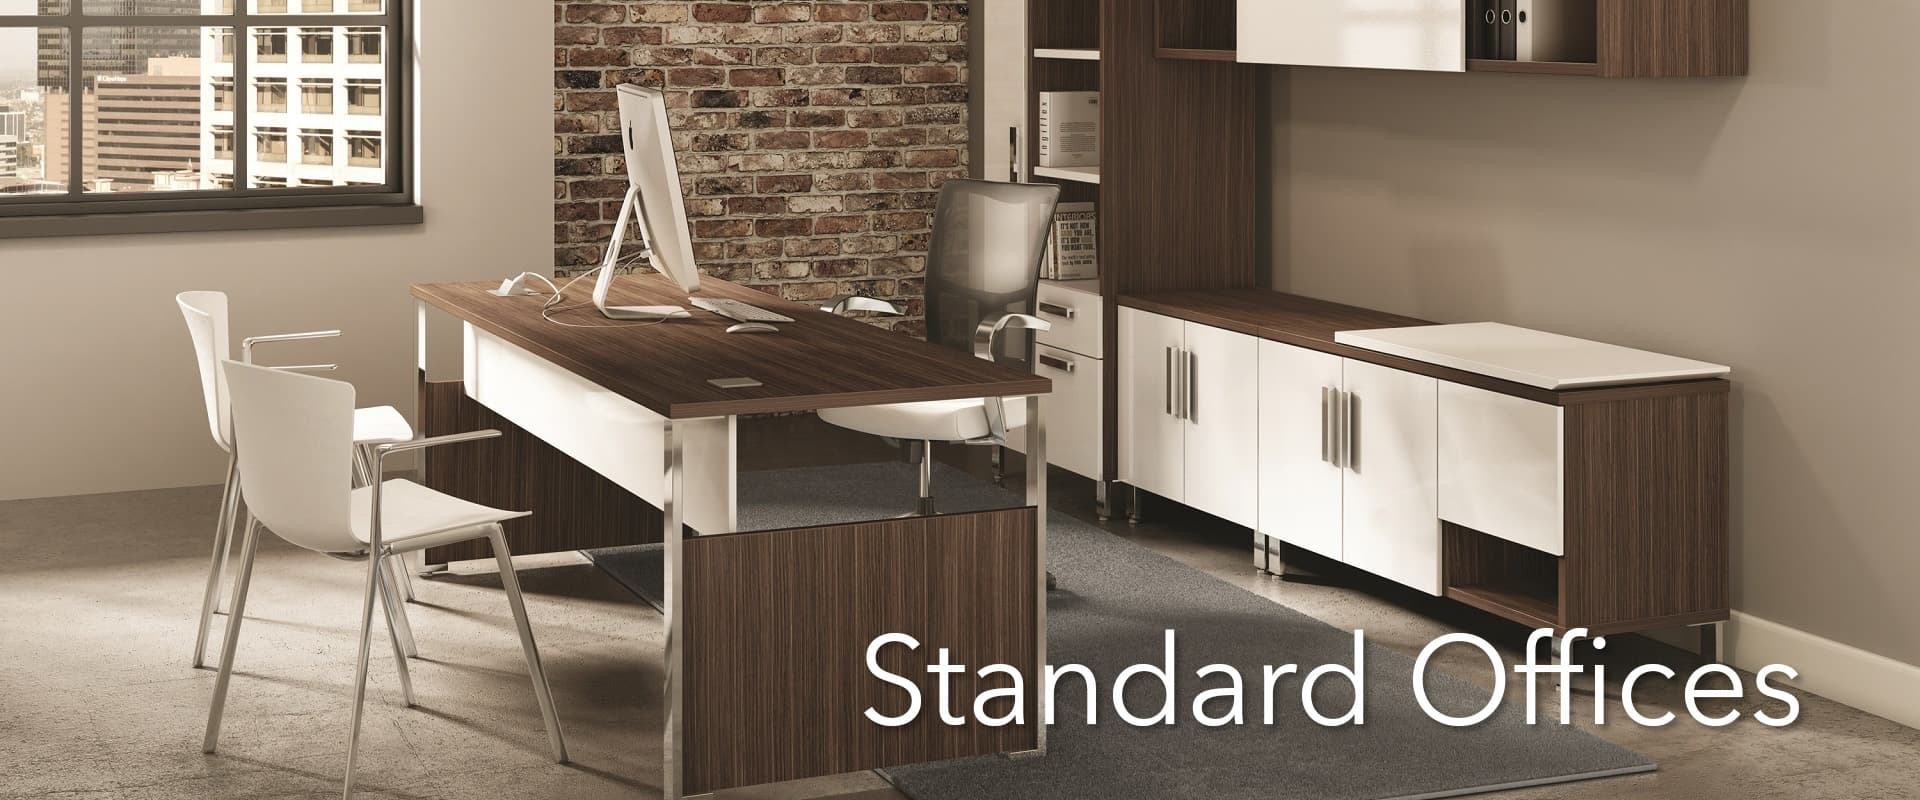 Furniture for Standard Offices